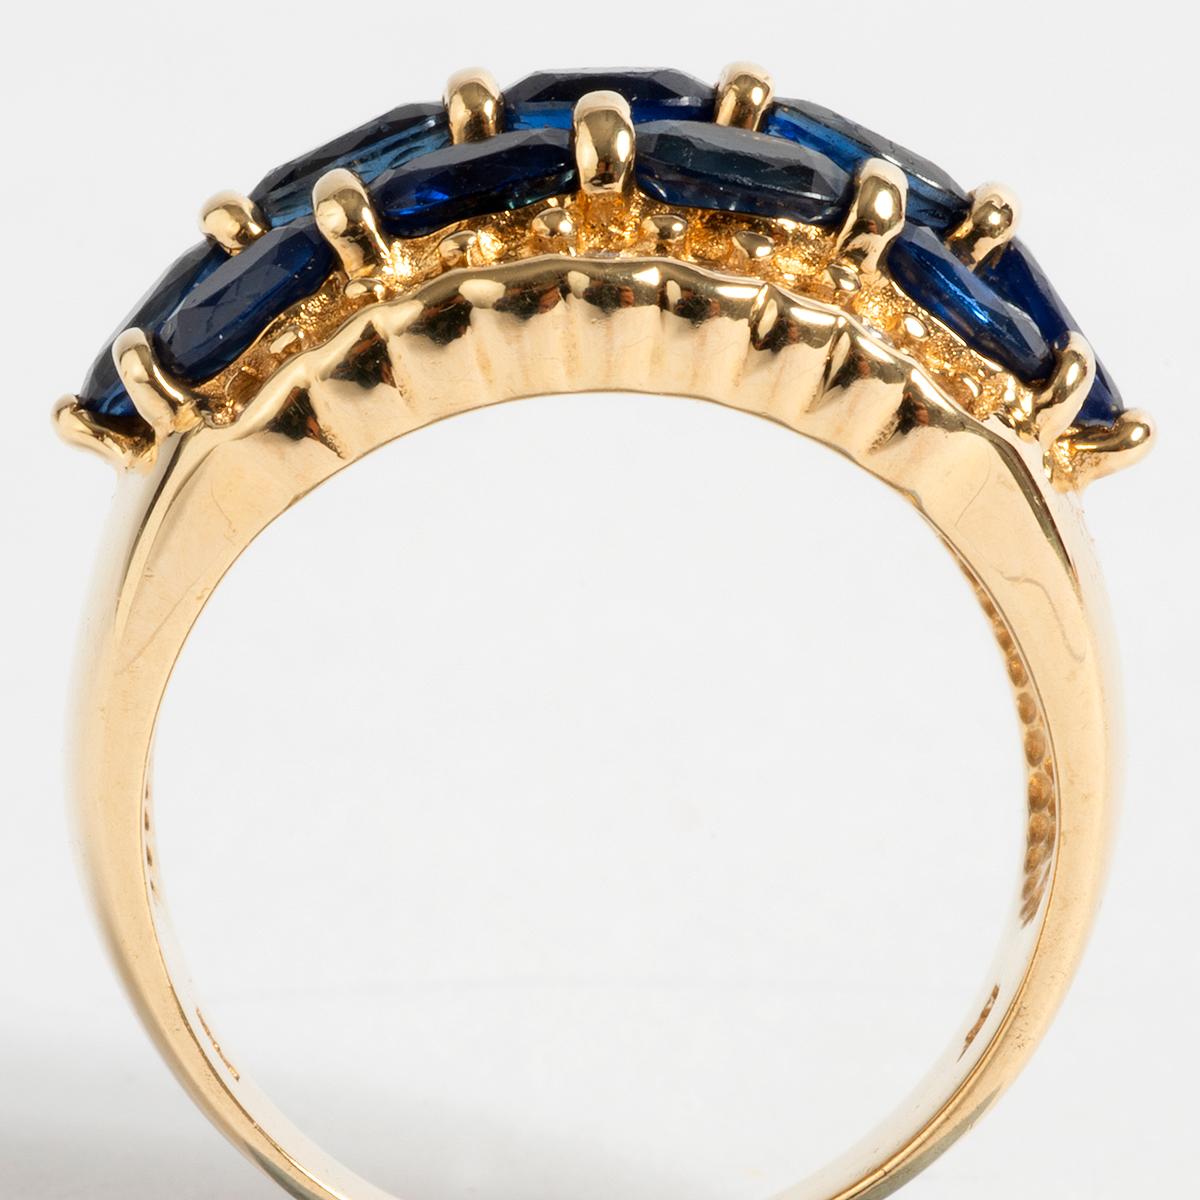 Mixed Cut Glamorous 14 Carat Yellow Gold Diamond and Sapphire Dress Ring For Sale